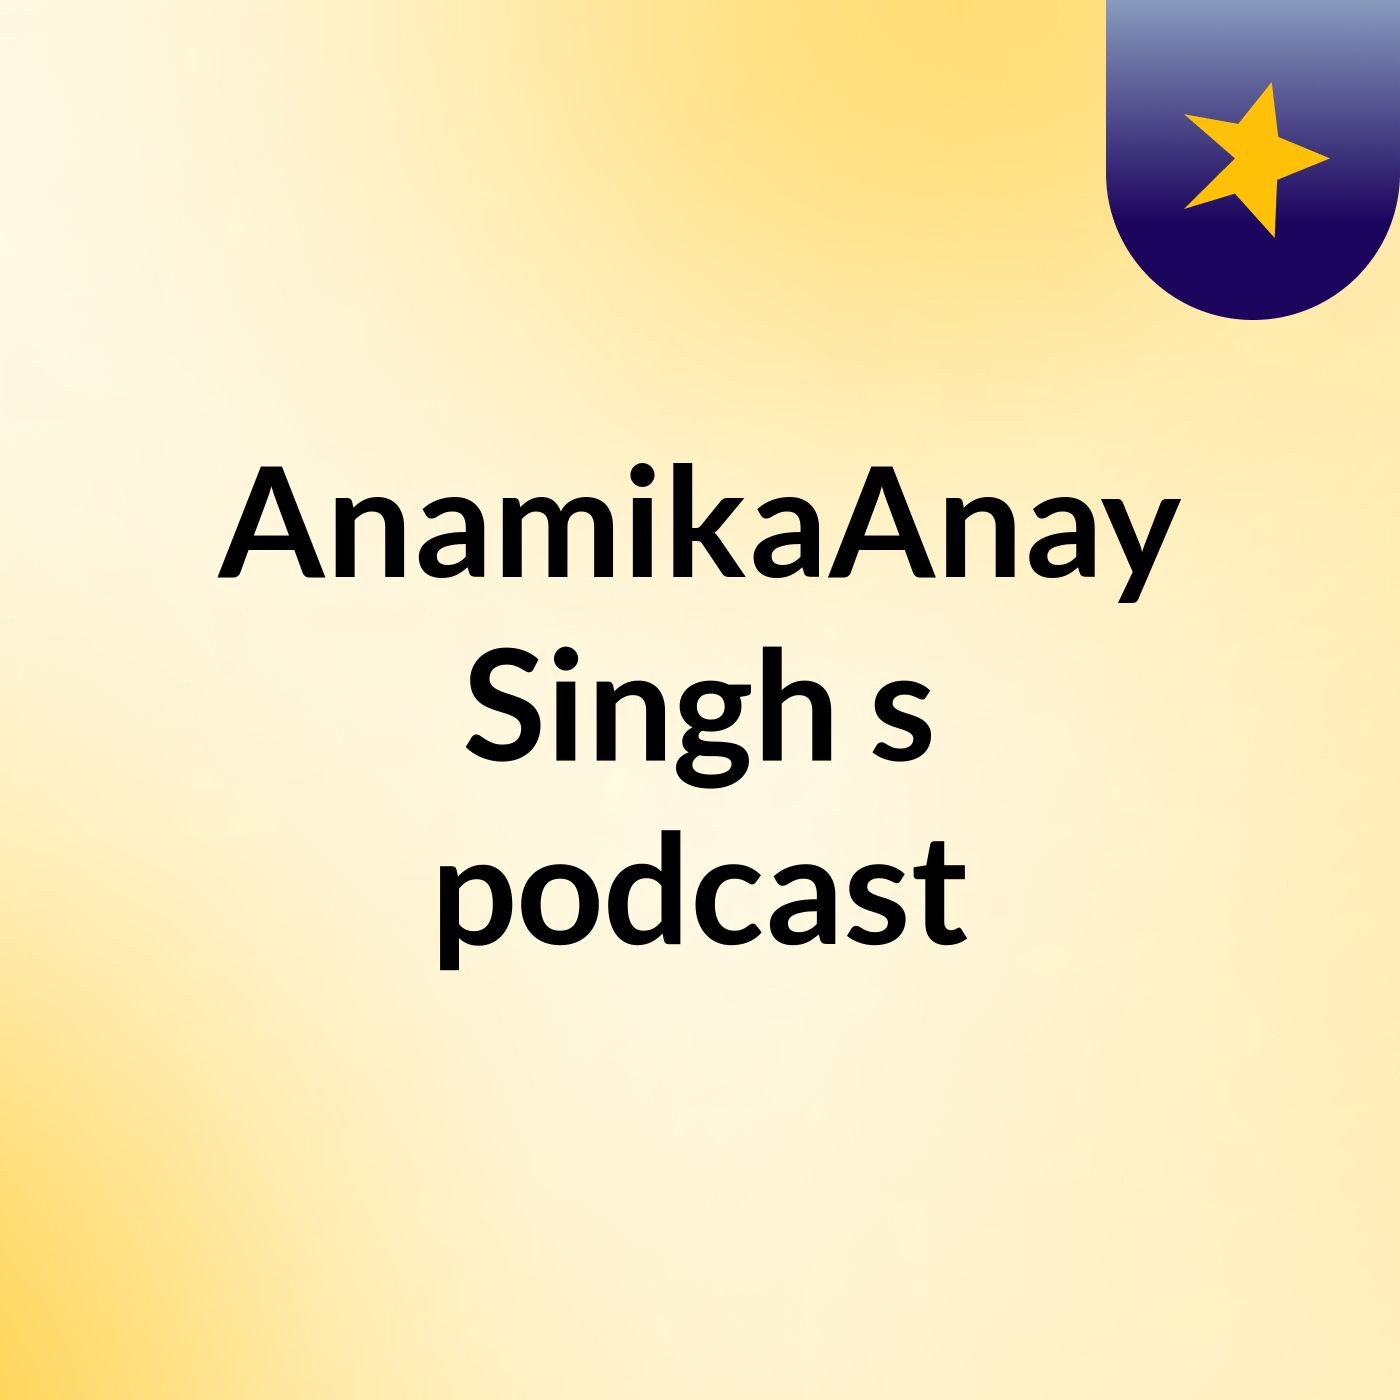 Episode 3 - AnamikaAnay Singh's podcast